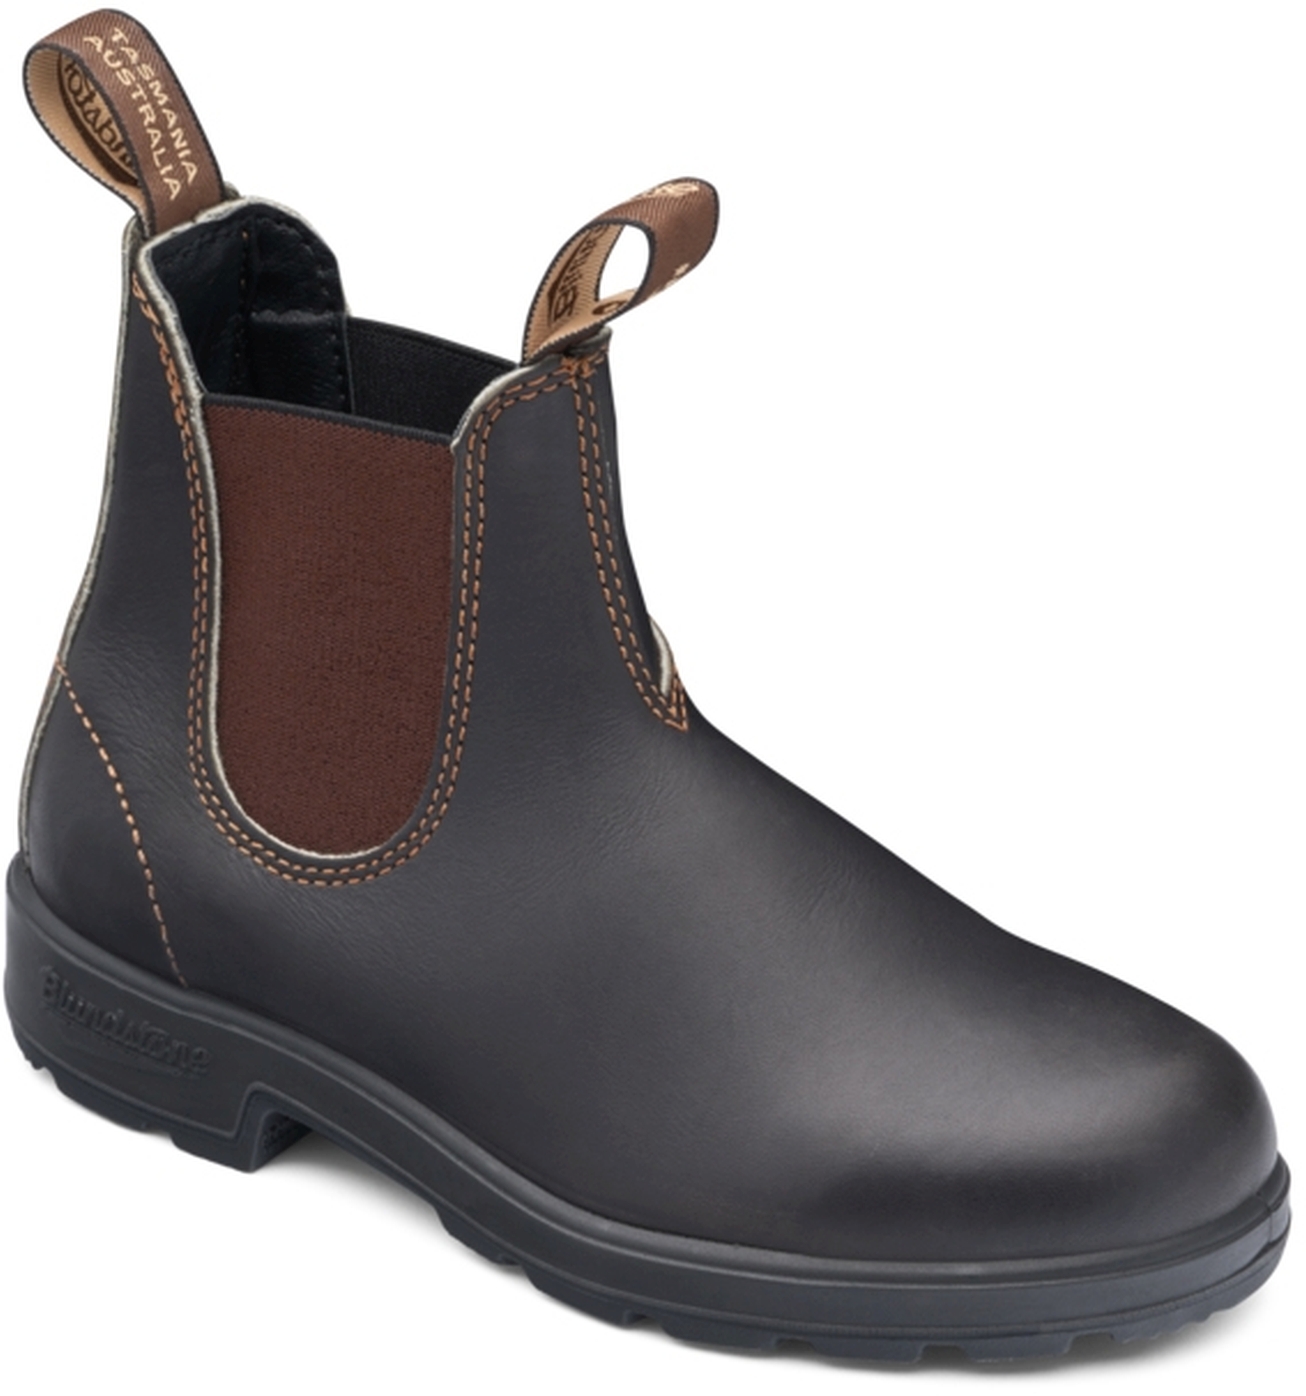 Blundstone 500 Stout Brown Leather (500 Series) Calf leather